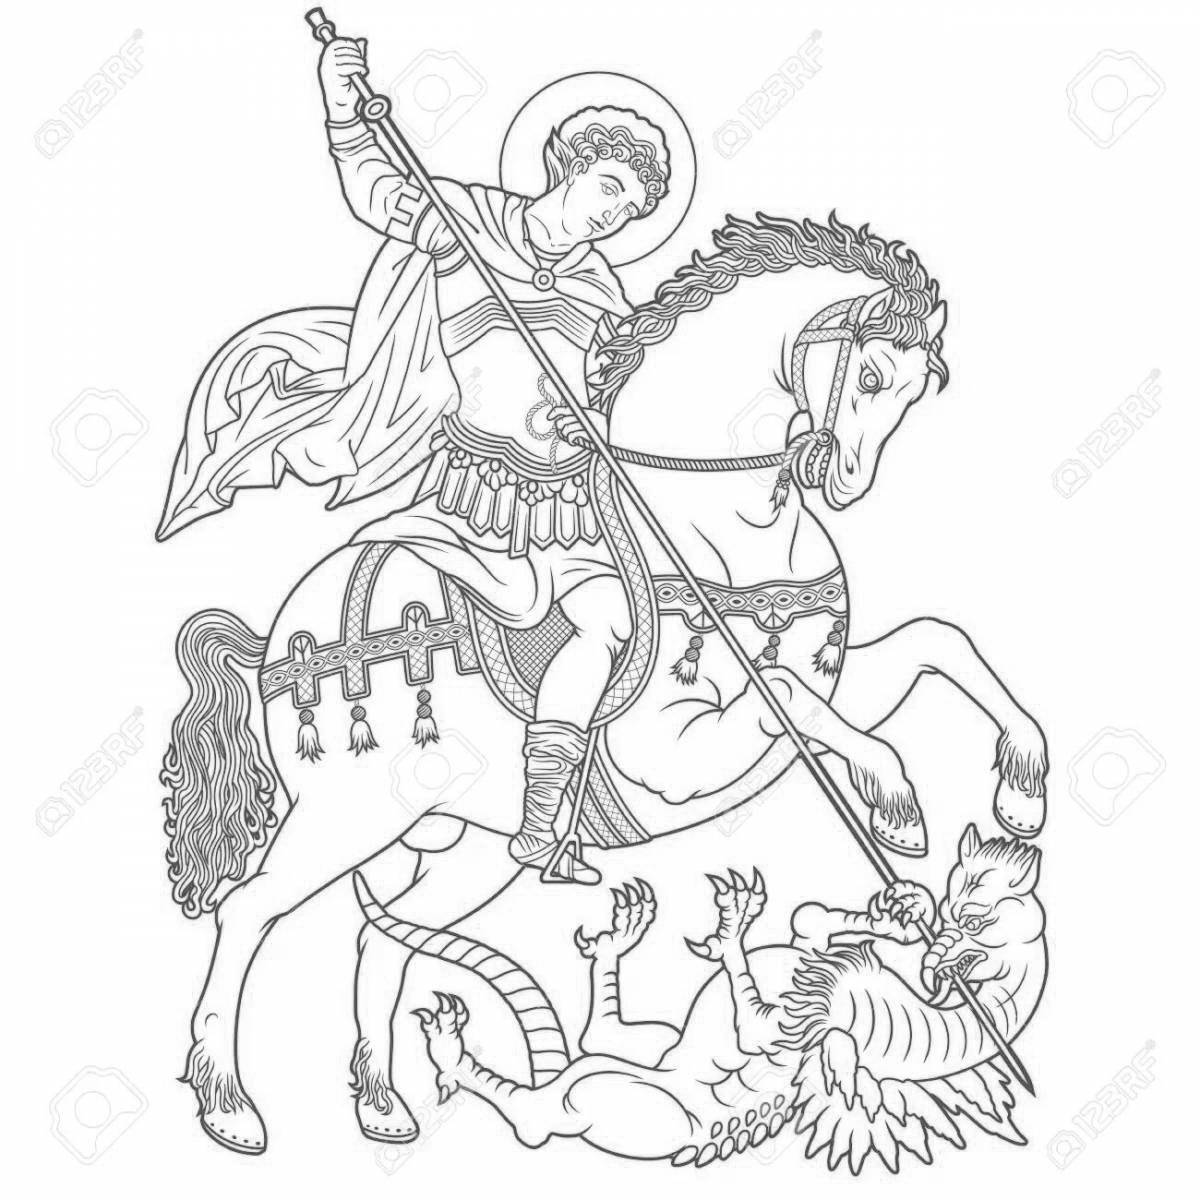 Entertaining coloring St. George the Victorious